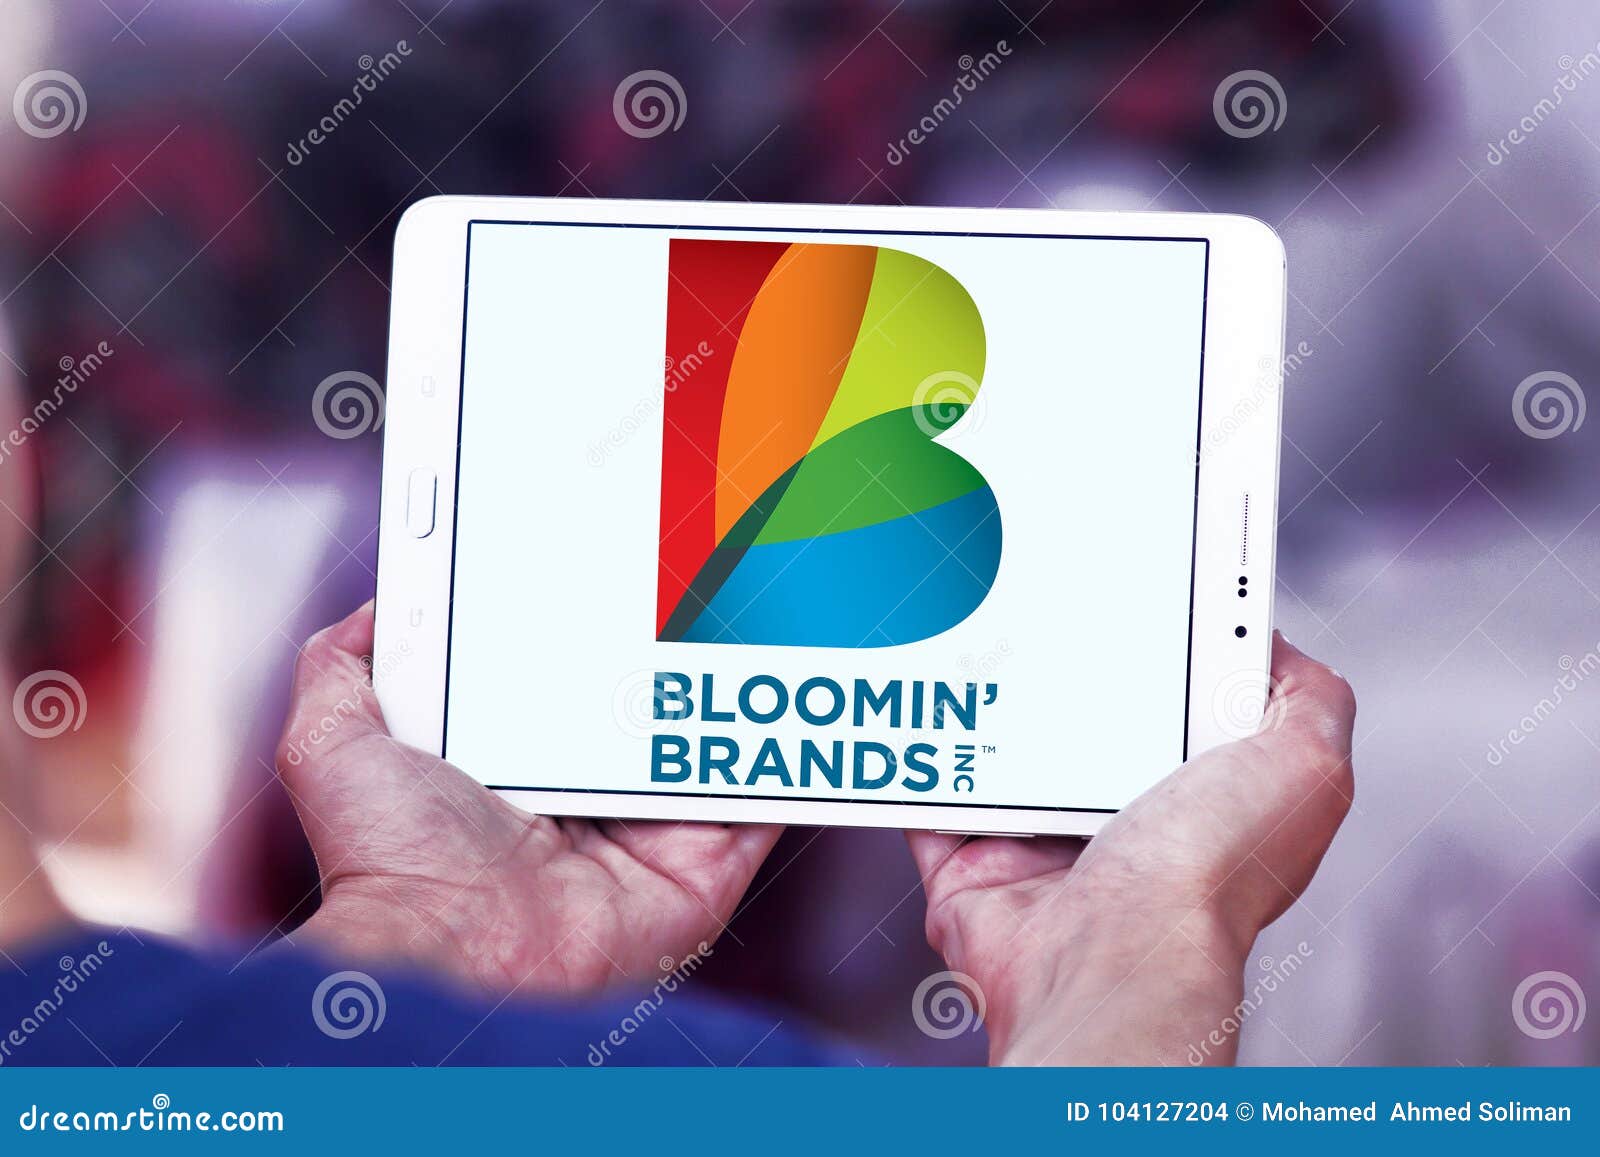 Bloomin Brands Company Logo Editorial Stock Image Image Of Industry Symbols